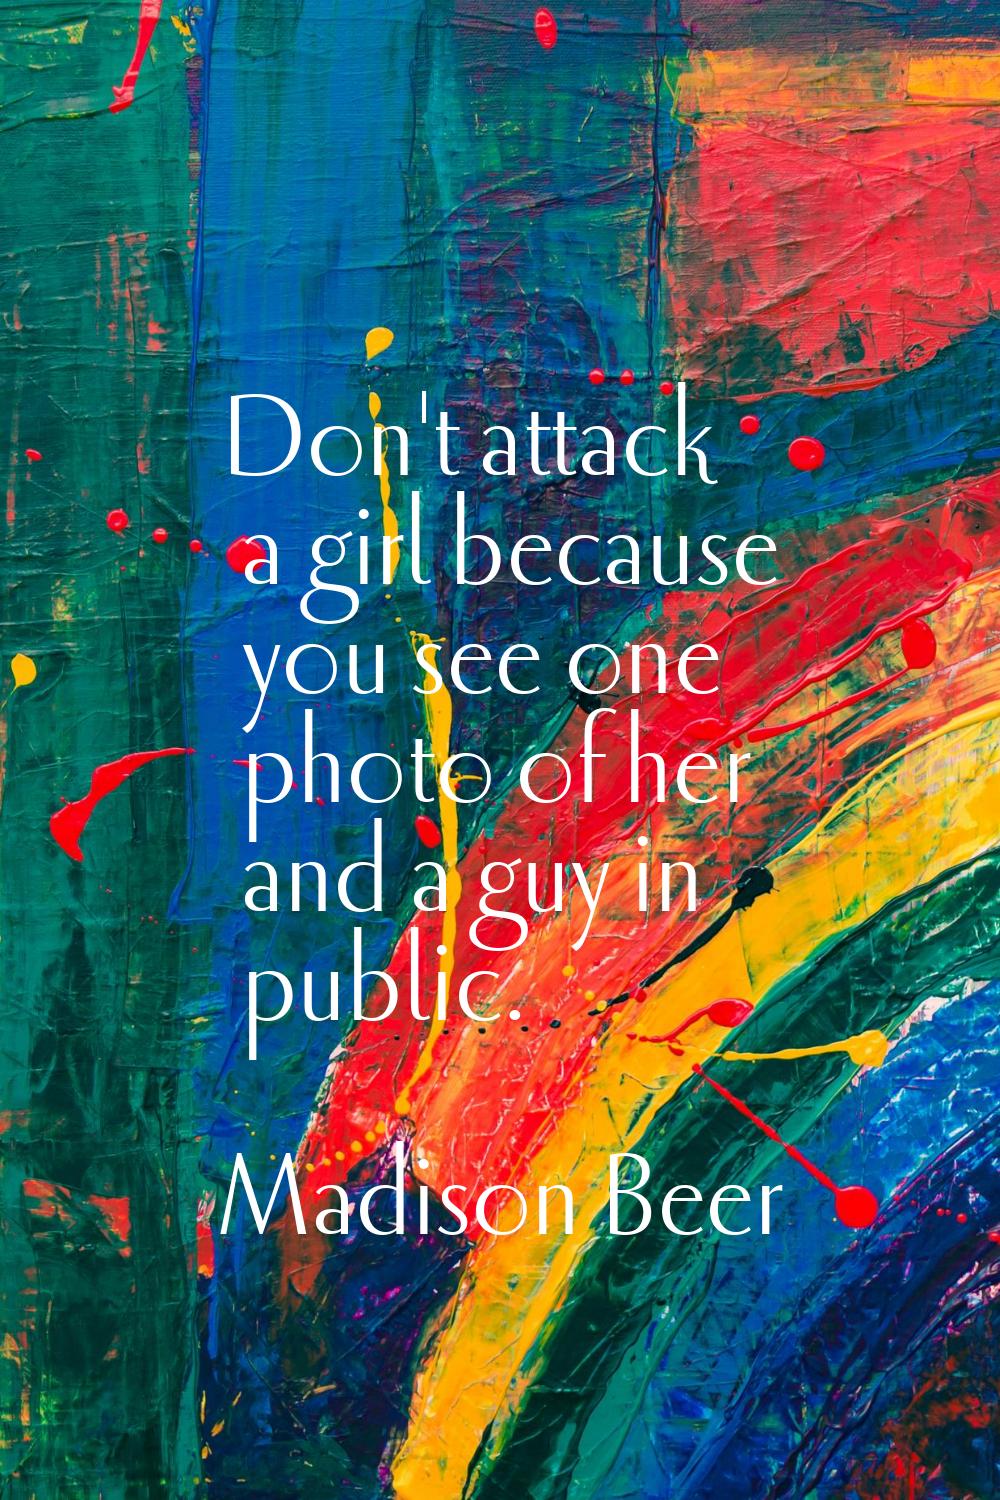 Don't attack a girl because you see one photo of her and a guy in public.